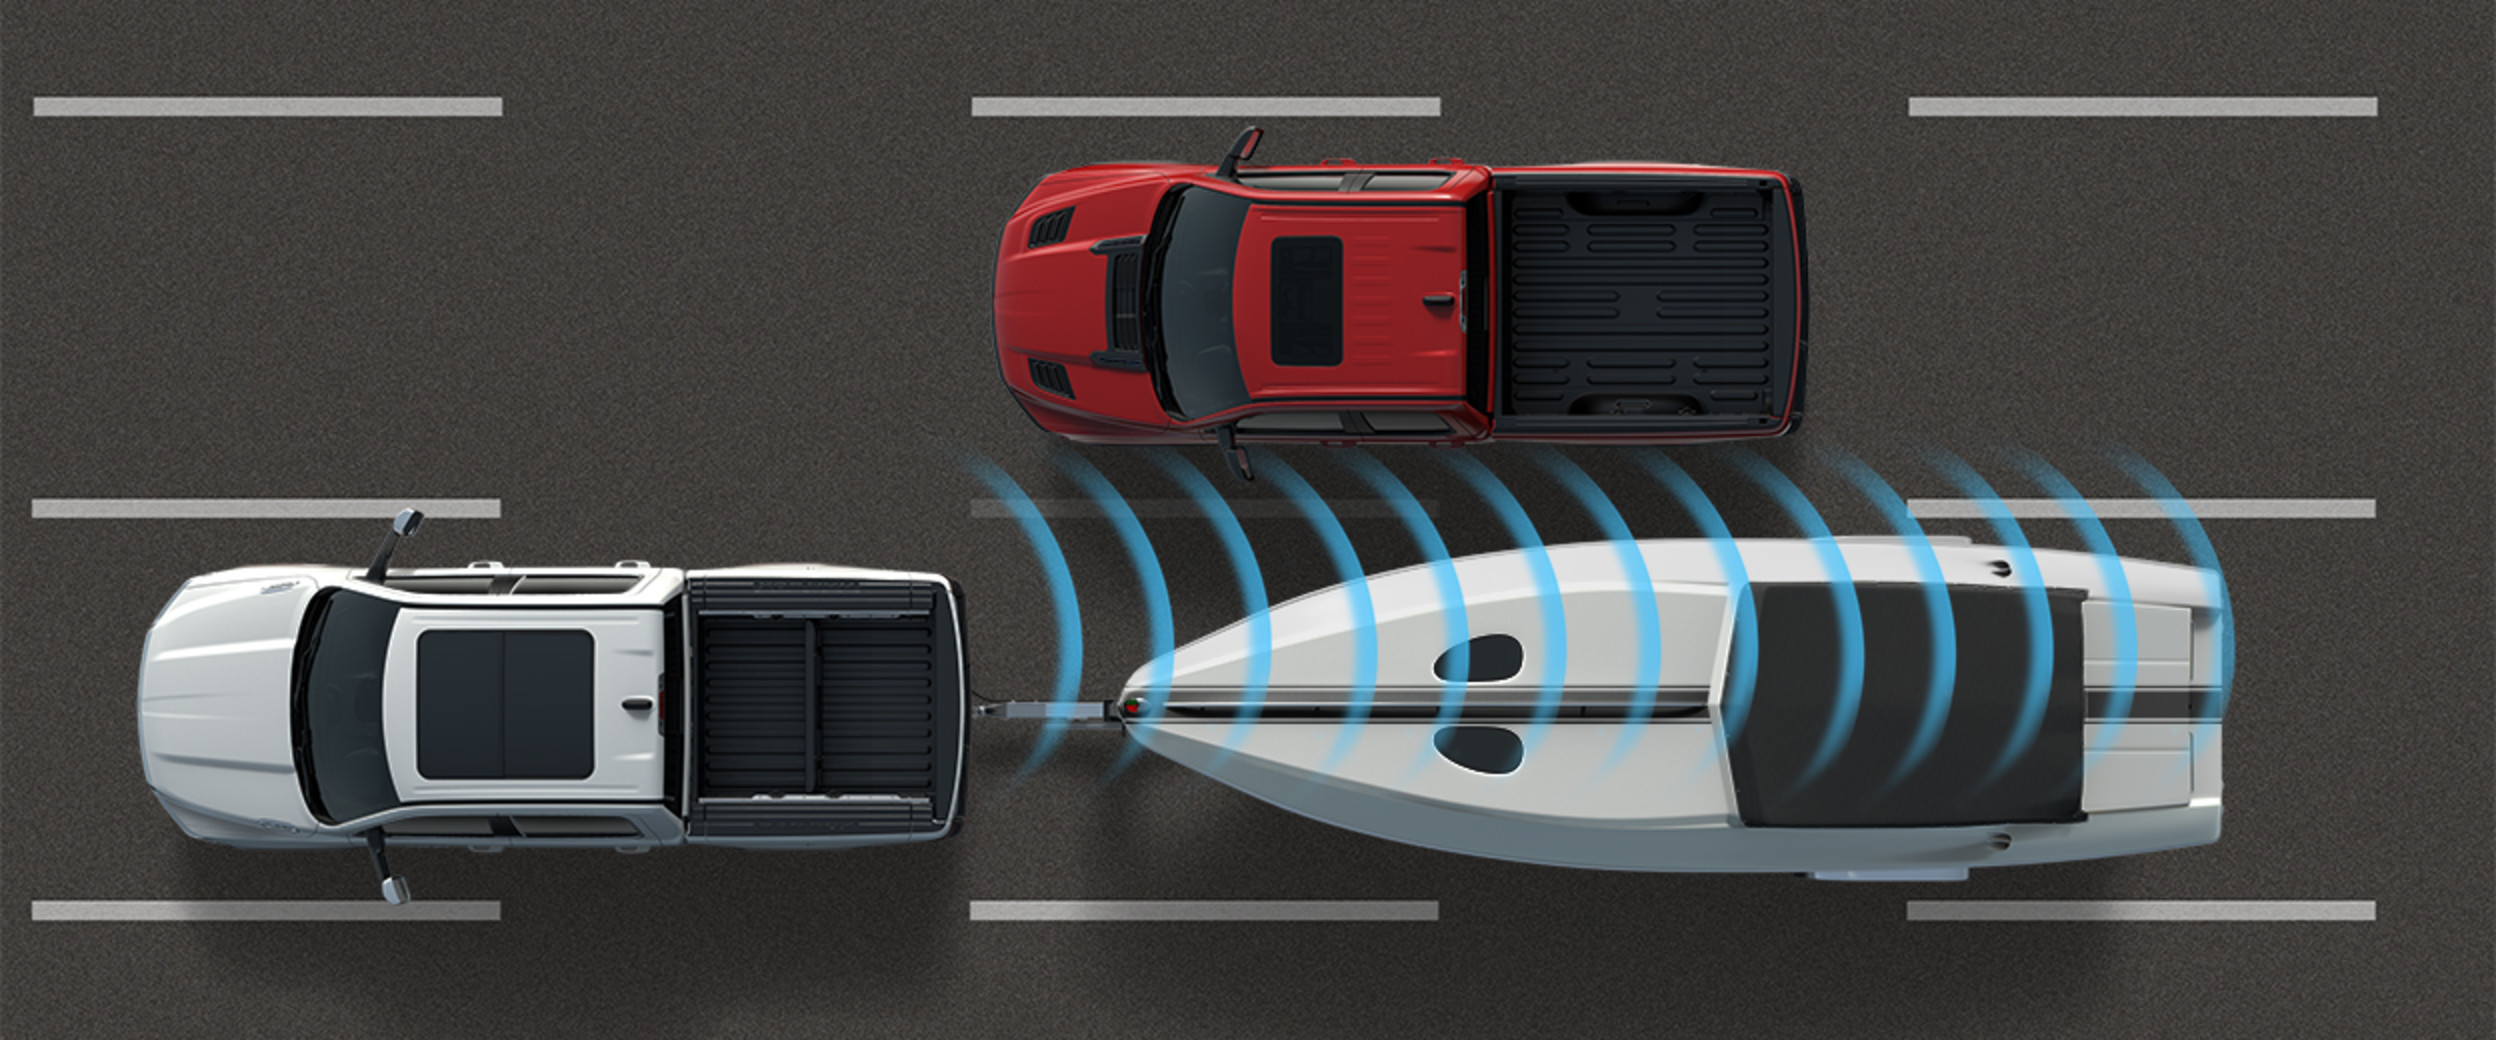 A rendering of a Ram 3500 with a motorboat in tow with illustrated sensor lines emanating from all around the vehicle to detect its surroundings.